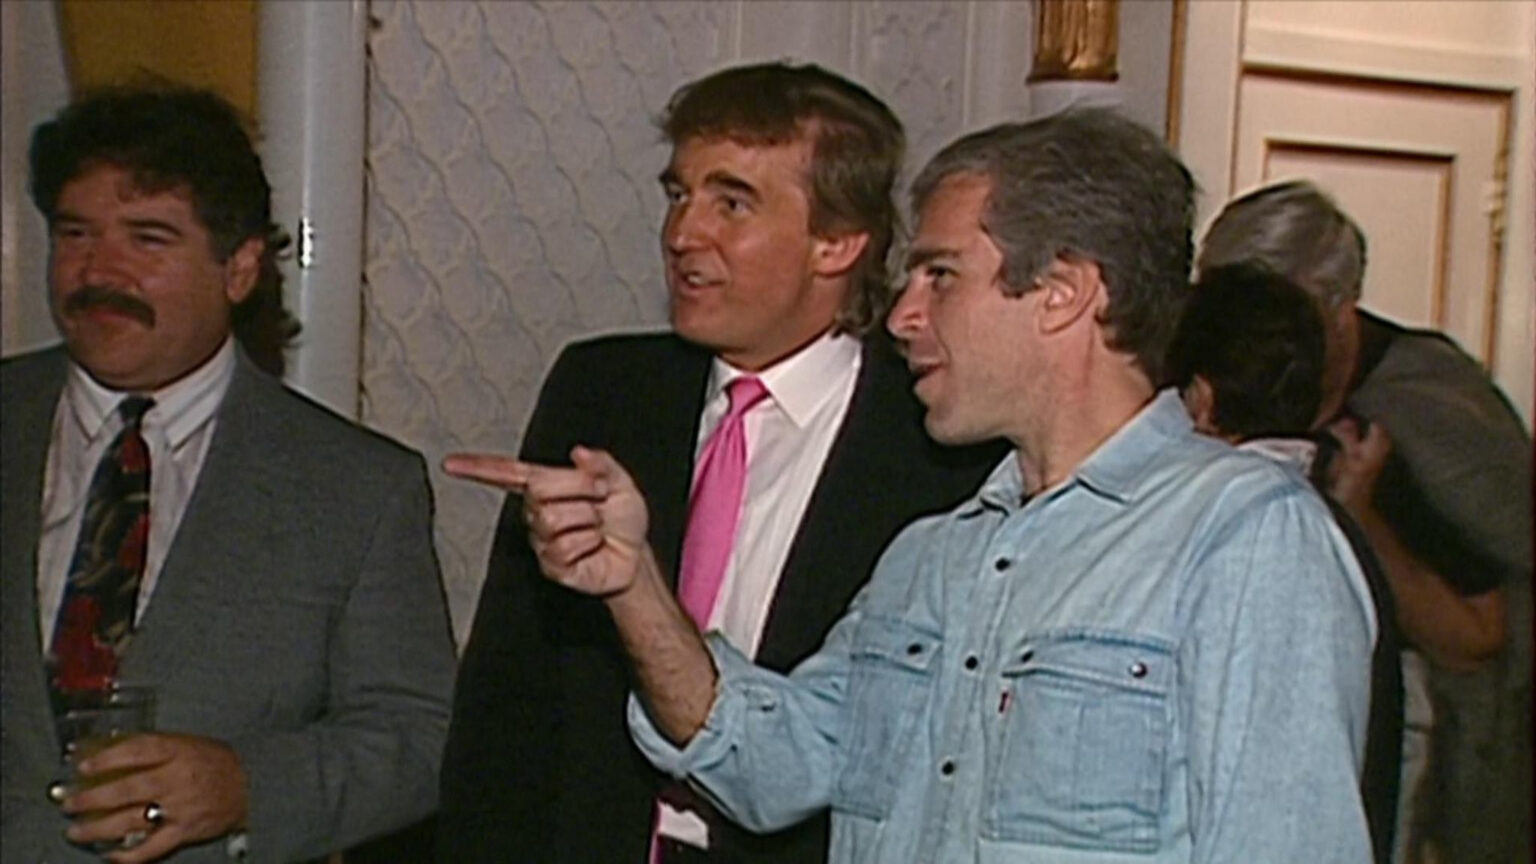 Is the former relationship between Donald Trump and Jeffrey Epstein concerning? Learn more about their interactions over the years.